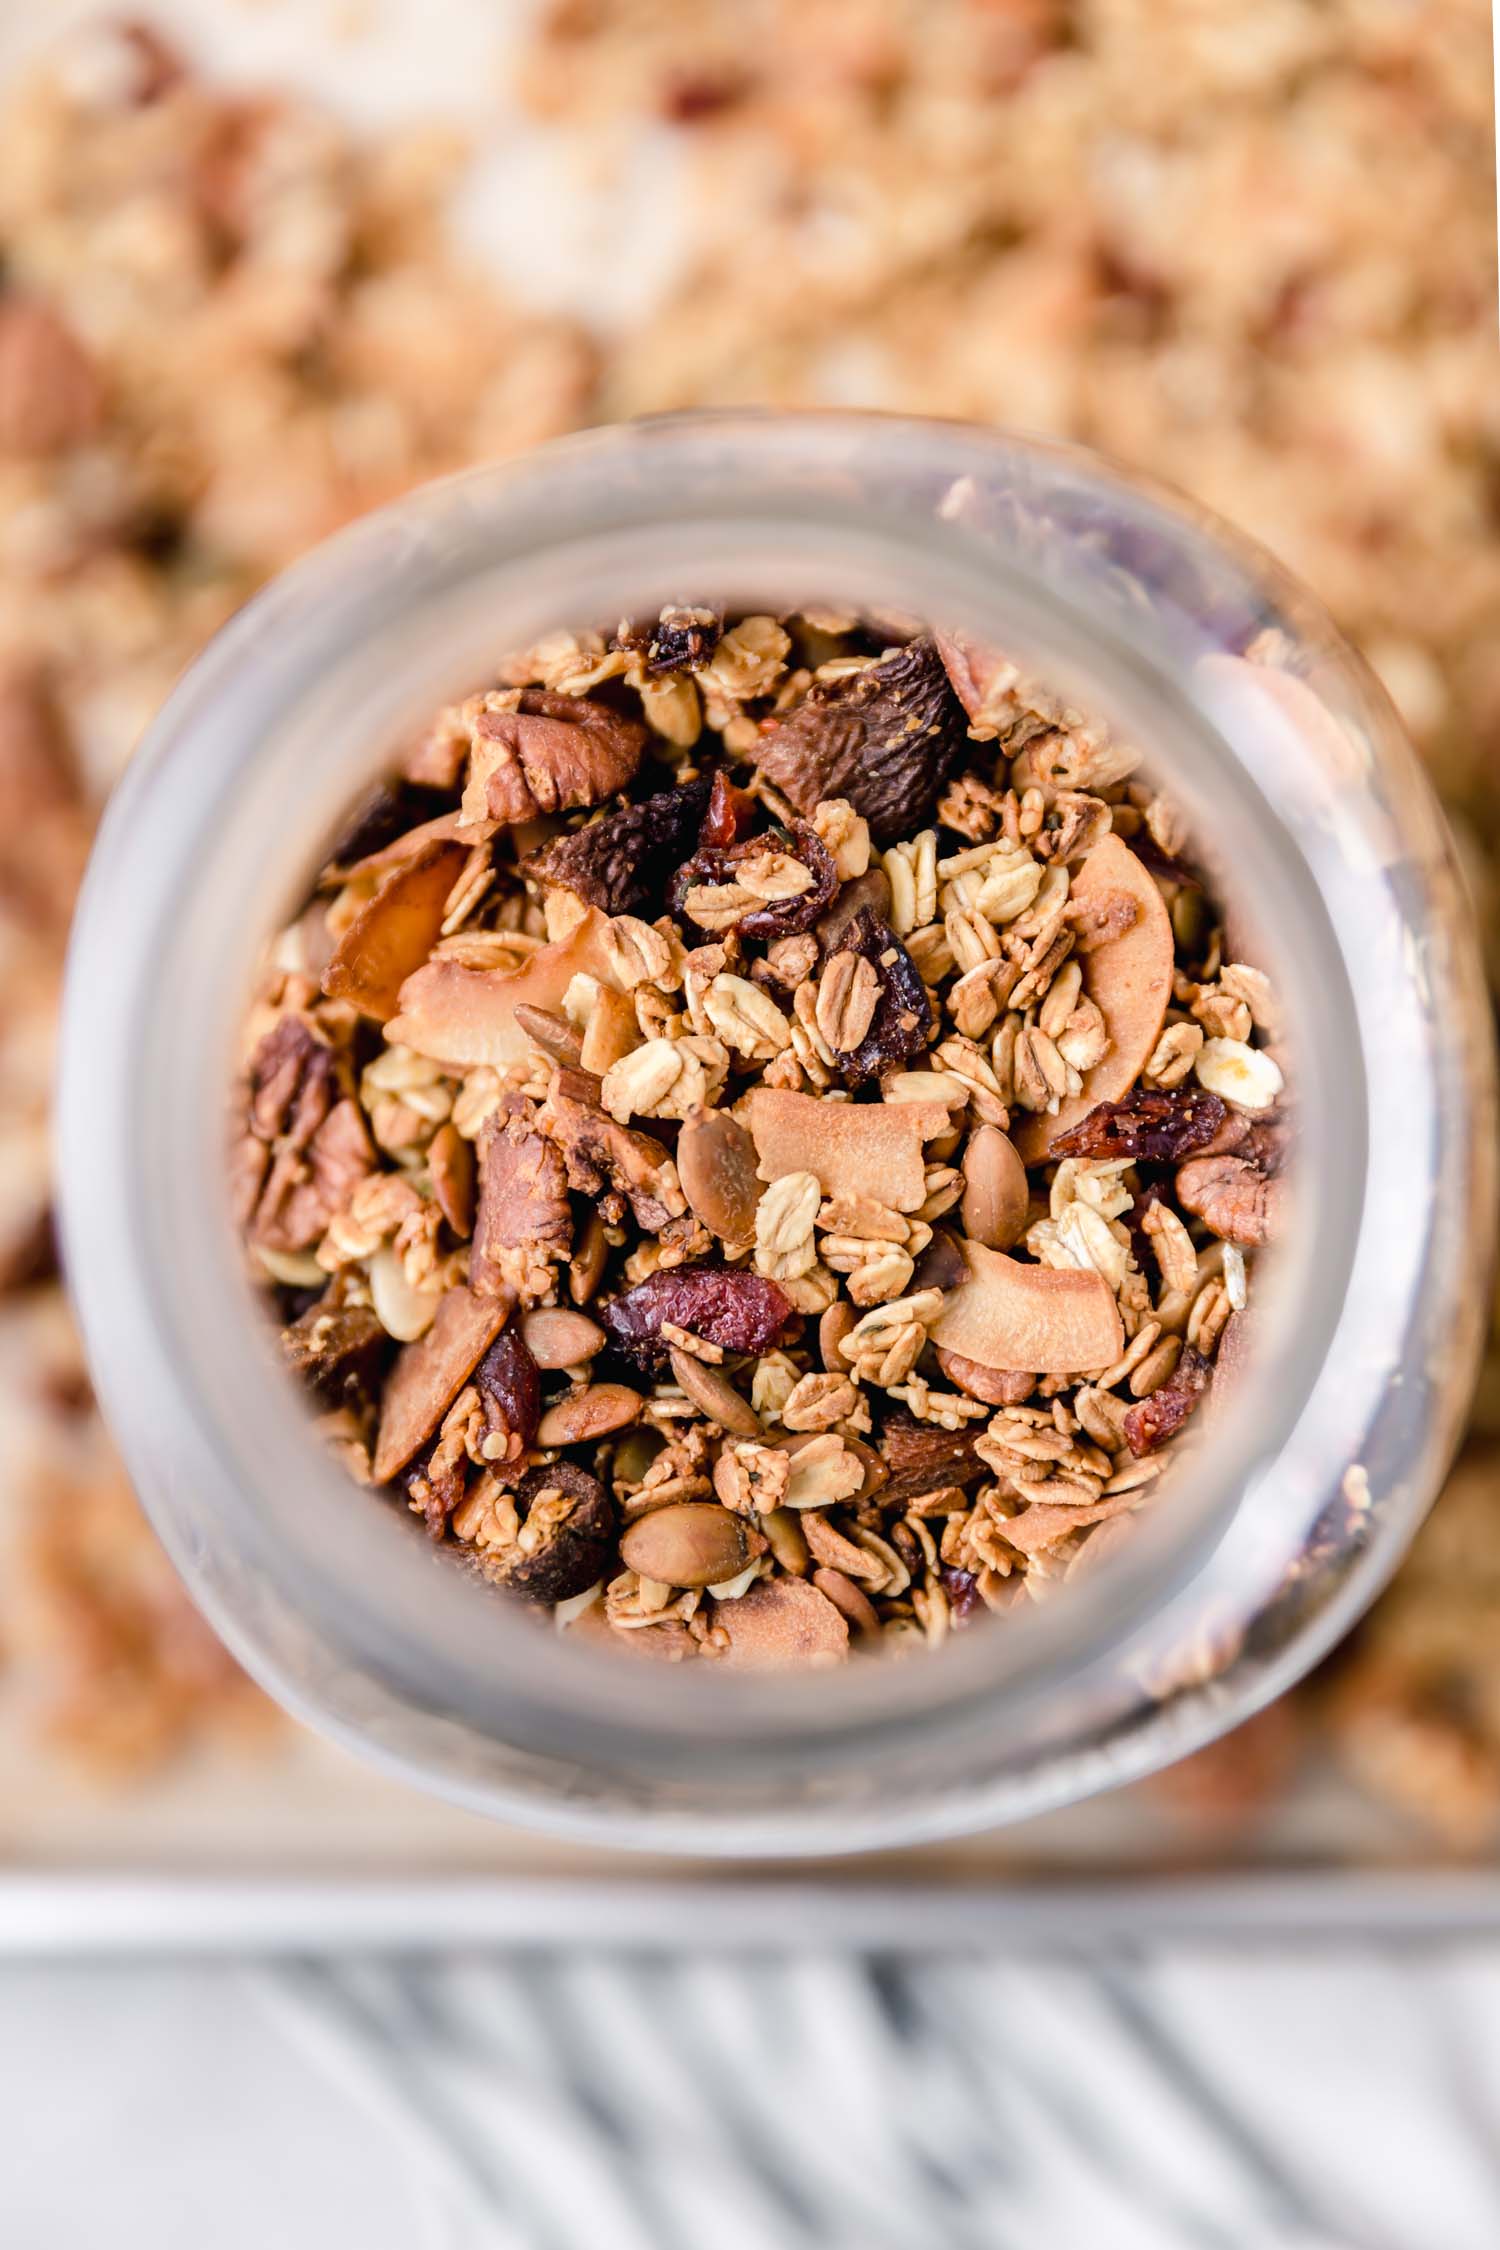 Easy Orange Pecan Power Granola is an easy recipe to make and loaded with goodies. #vegangranola #orangepecan #pecangranola #homemadegranola #recipe #veganrecipe #breakfastrecipe #plantbased